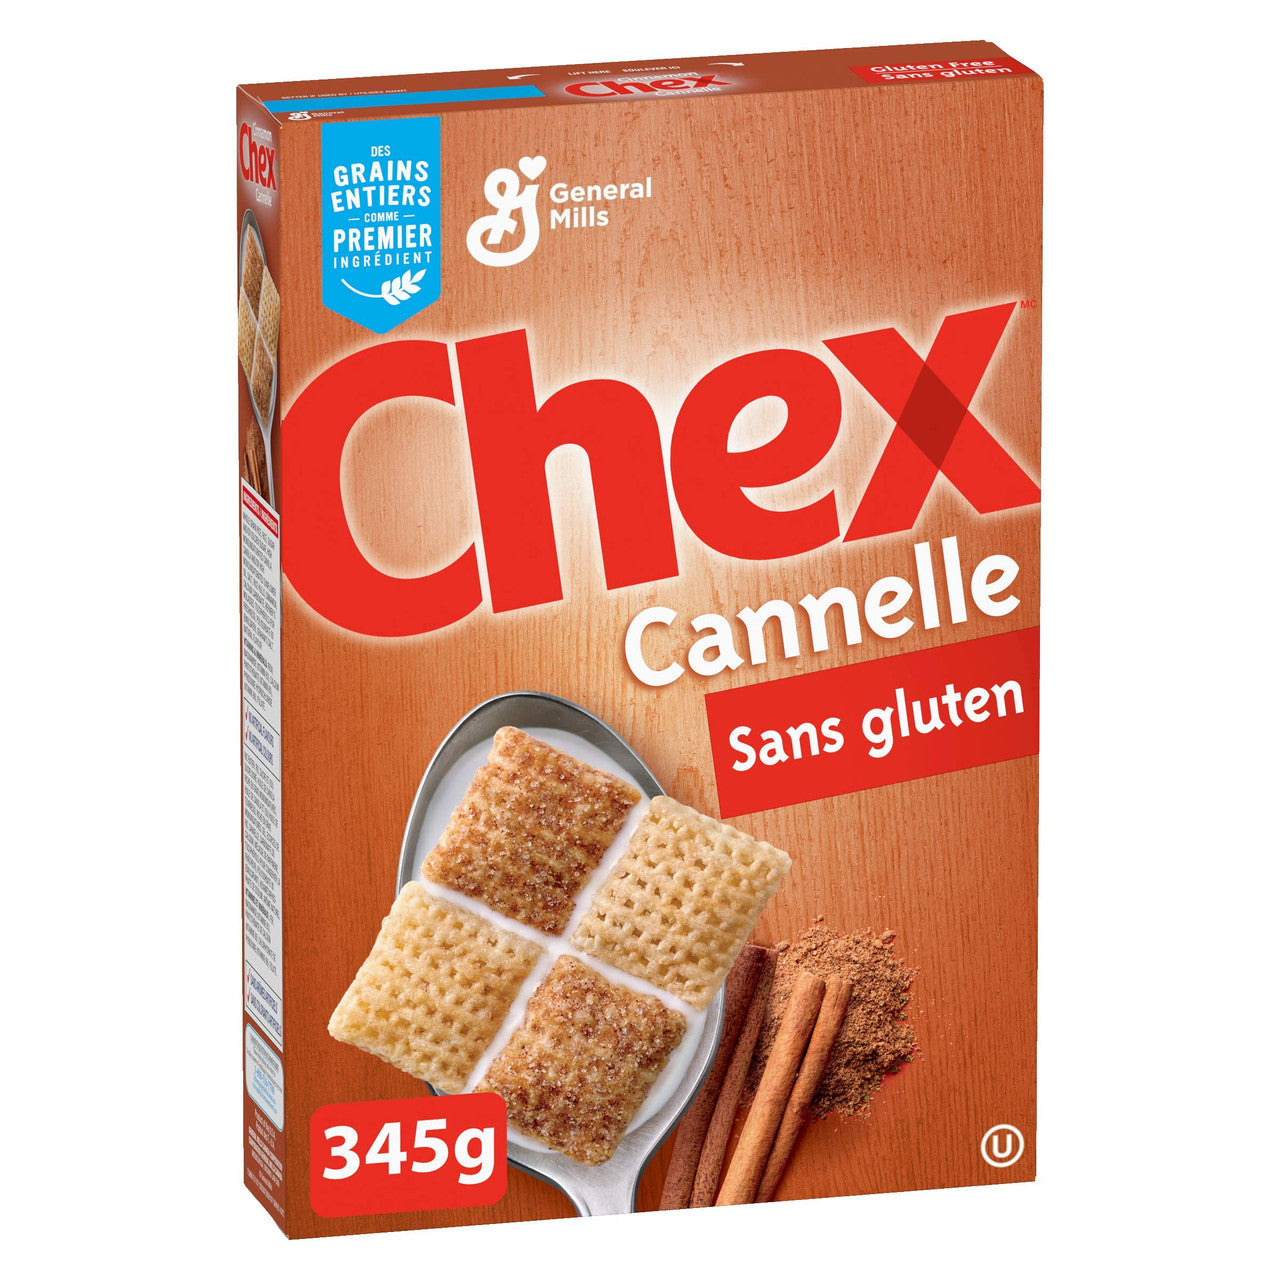 Chex Gluten Free Cinnamon Cereal, 345g/12.1oz, (Imported from Canada)